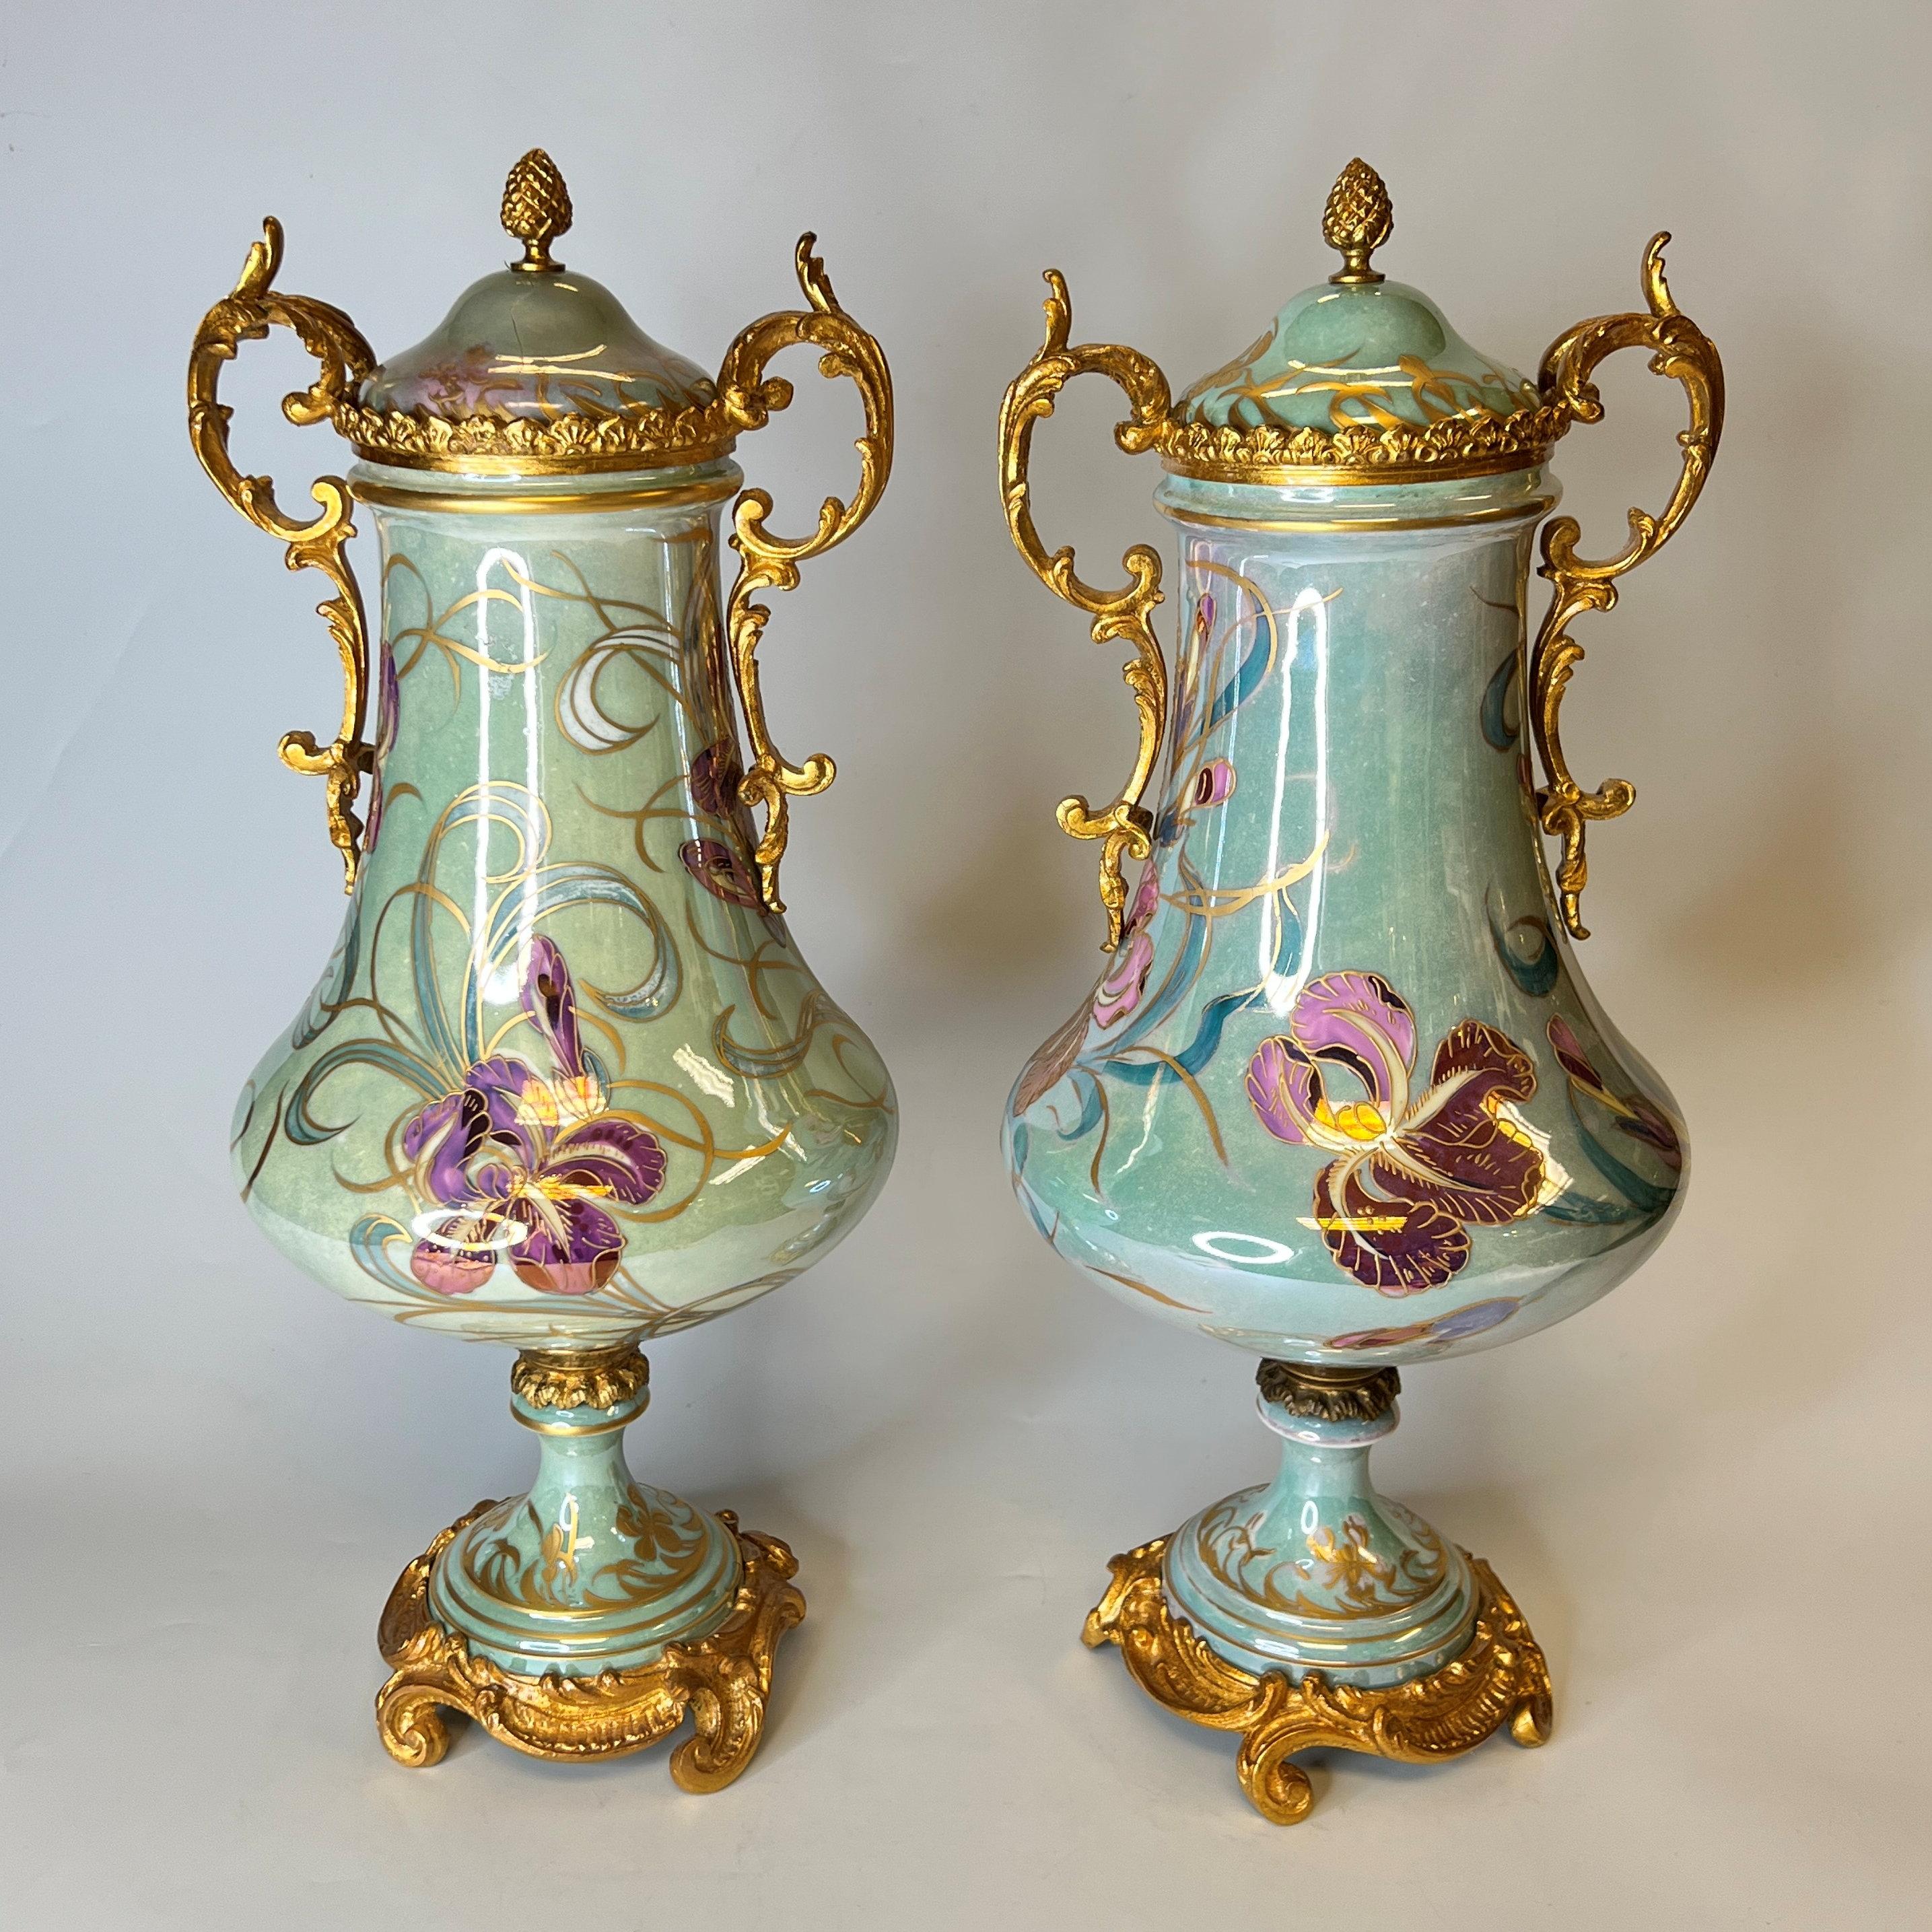 Pair of Art Nouveau Sevres Style Iridescent Porcelain Vases and Covers by Lheri For Sale 2